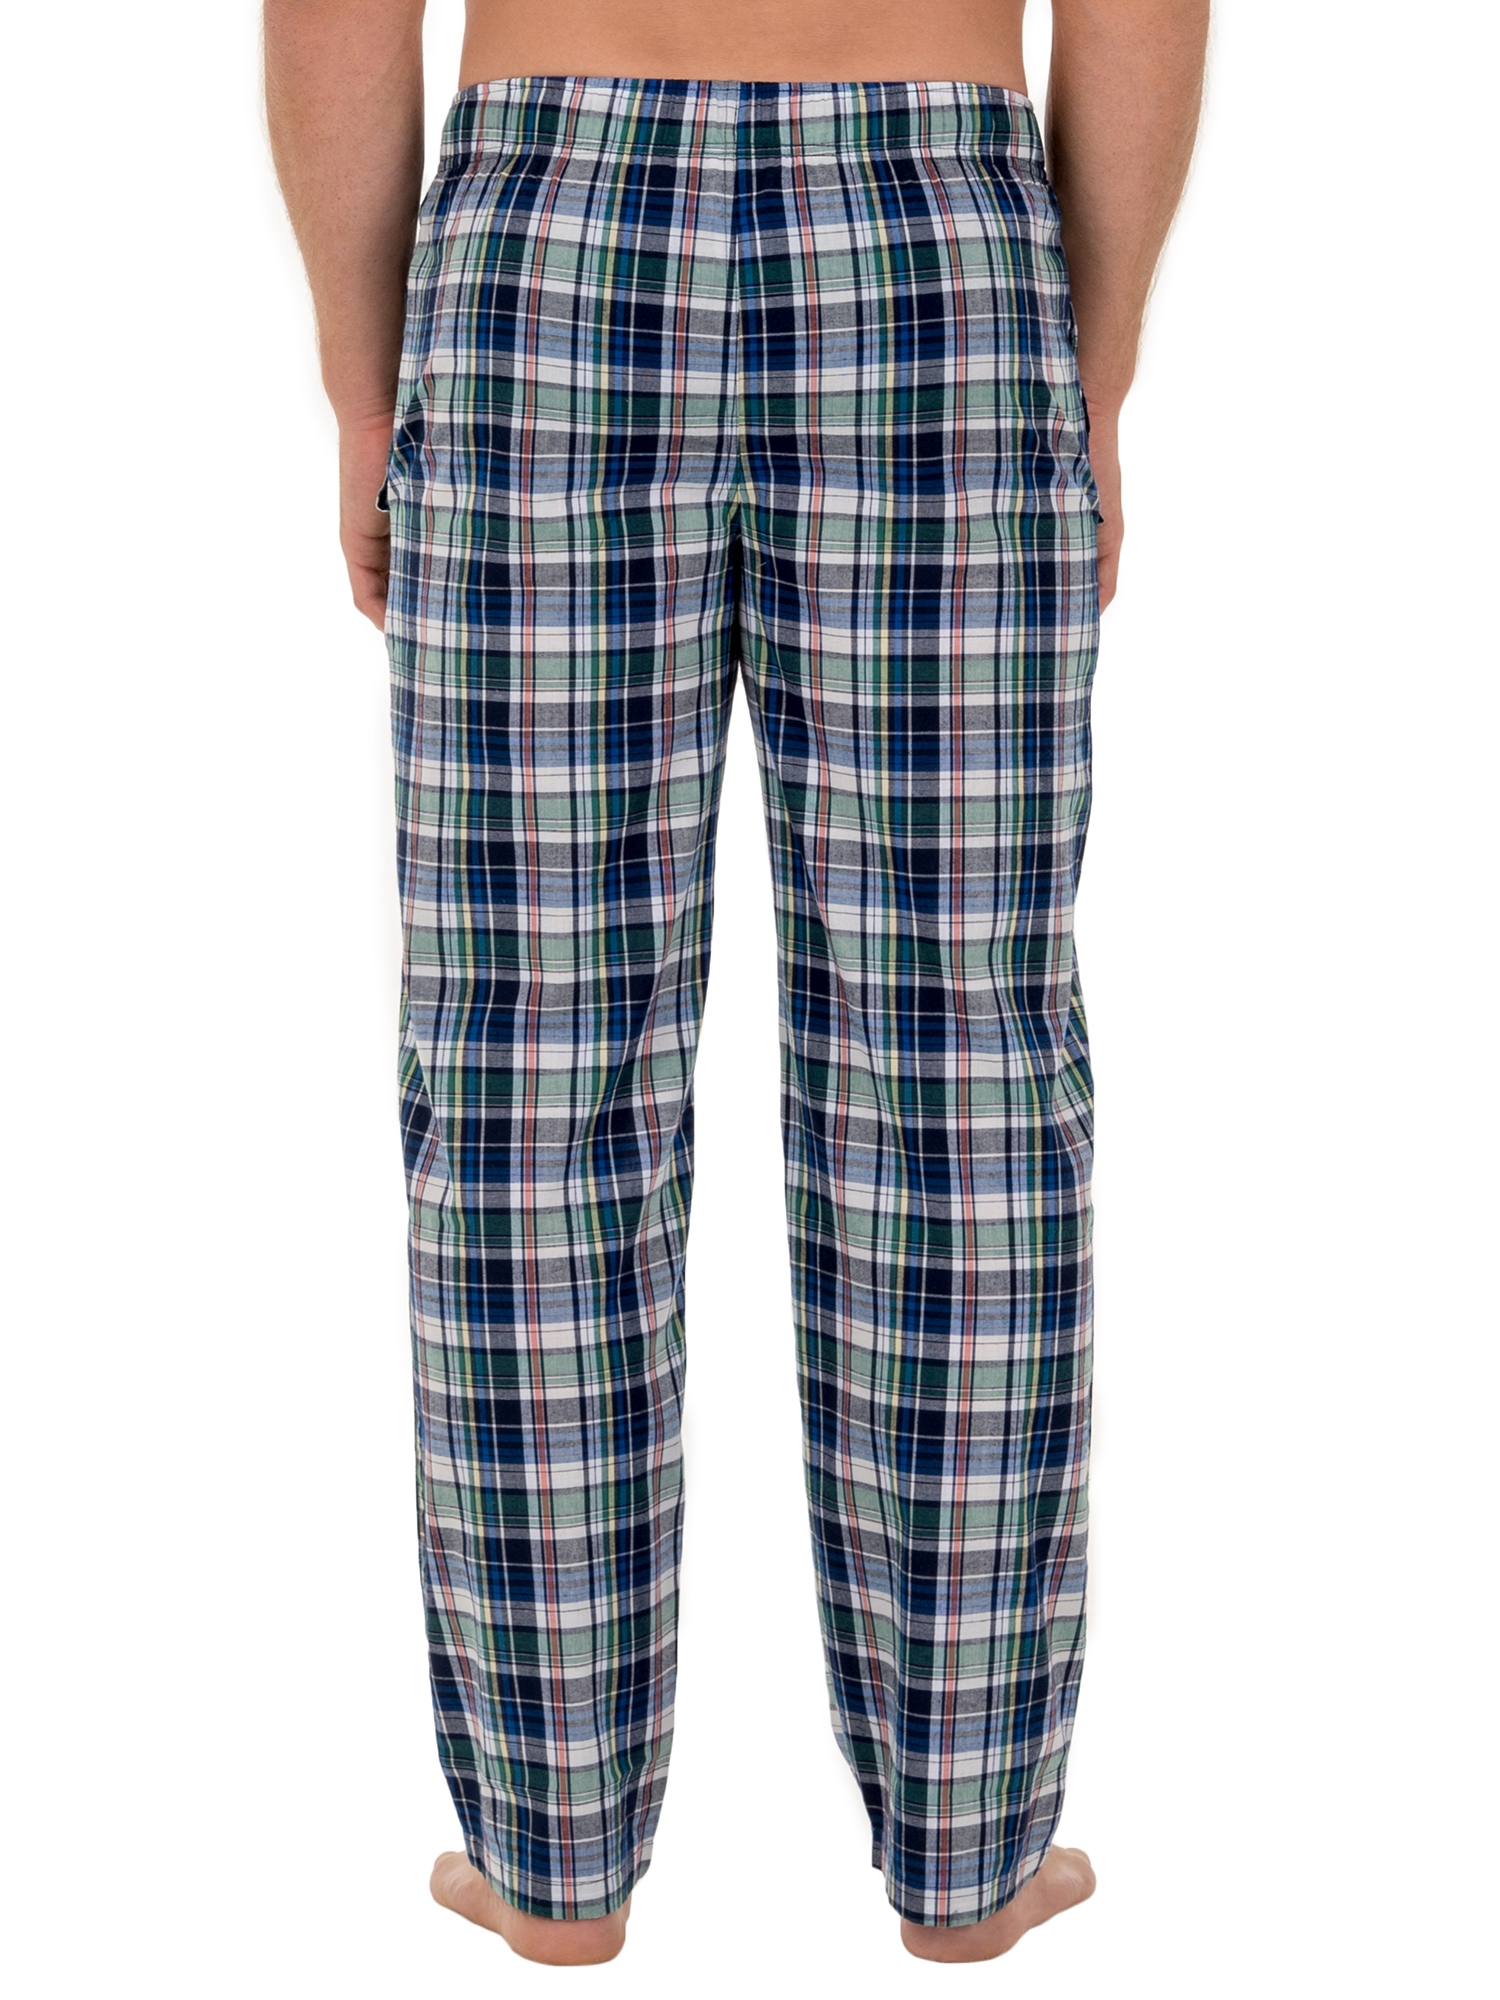 Fruit of the Loom Men's and Big Men's Microsanded Woven Plaid Pajama Pants, Sizes S-6XL & LT-3XLT - image 4 of 5